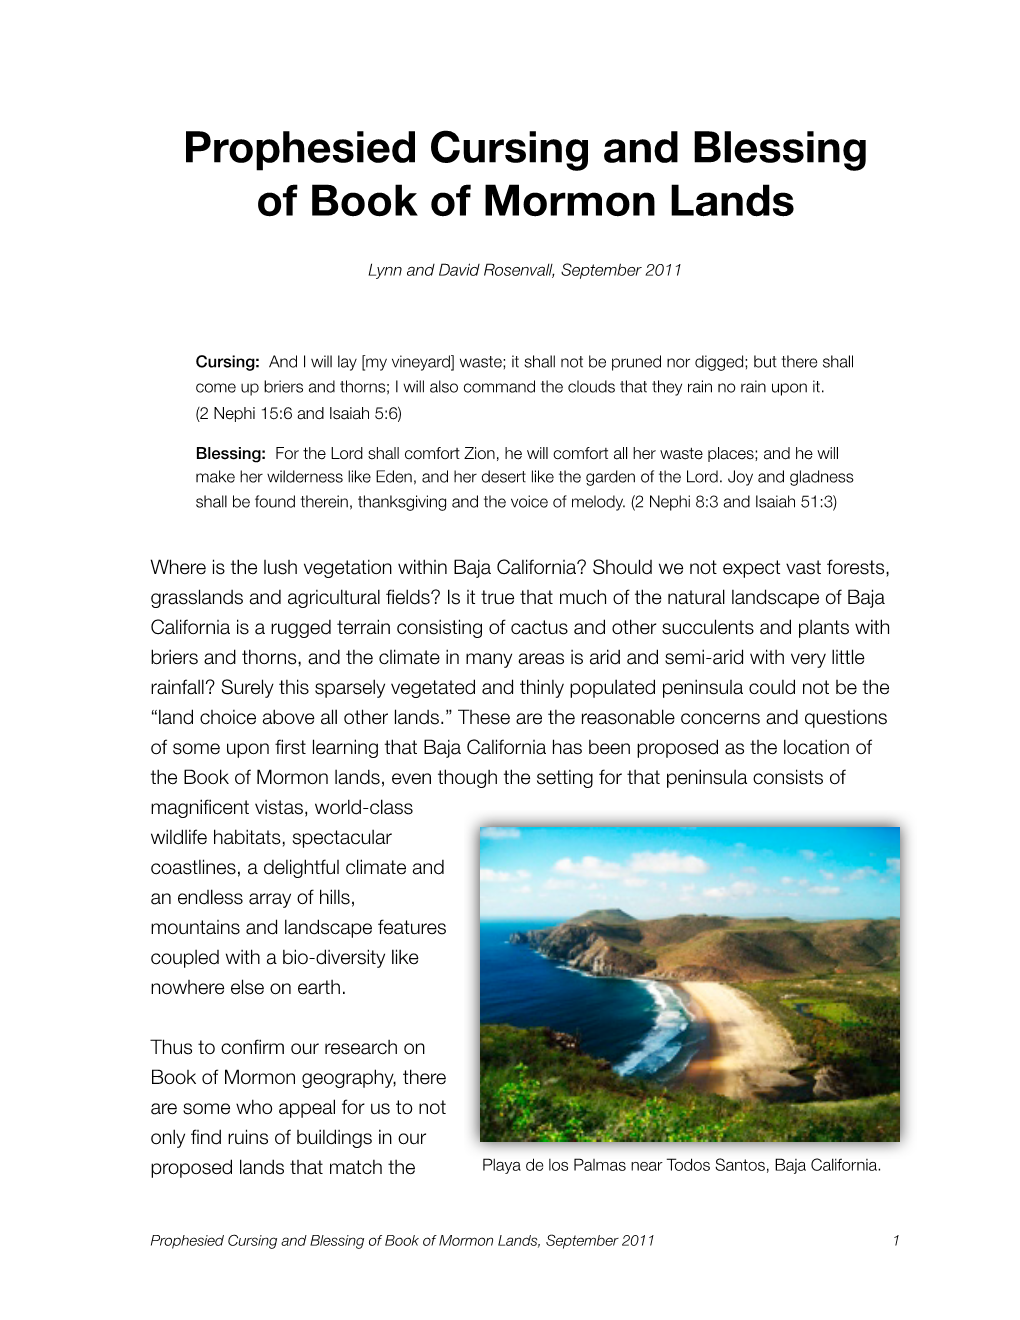 Prophesied Cursing and Blessing of Book of Mormon Lands